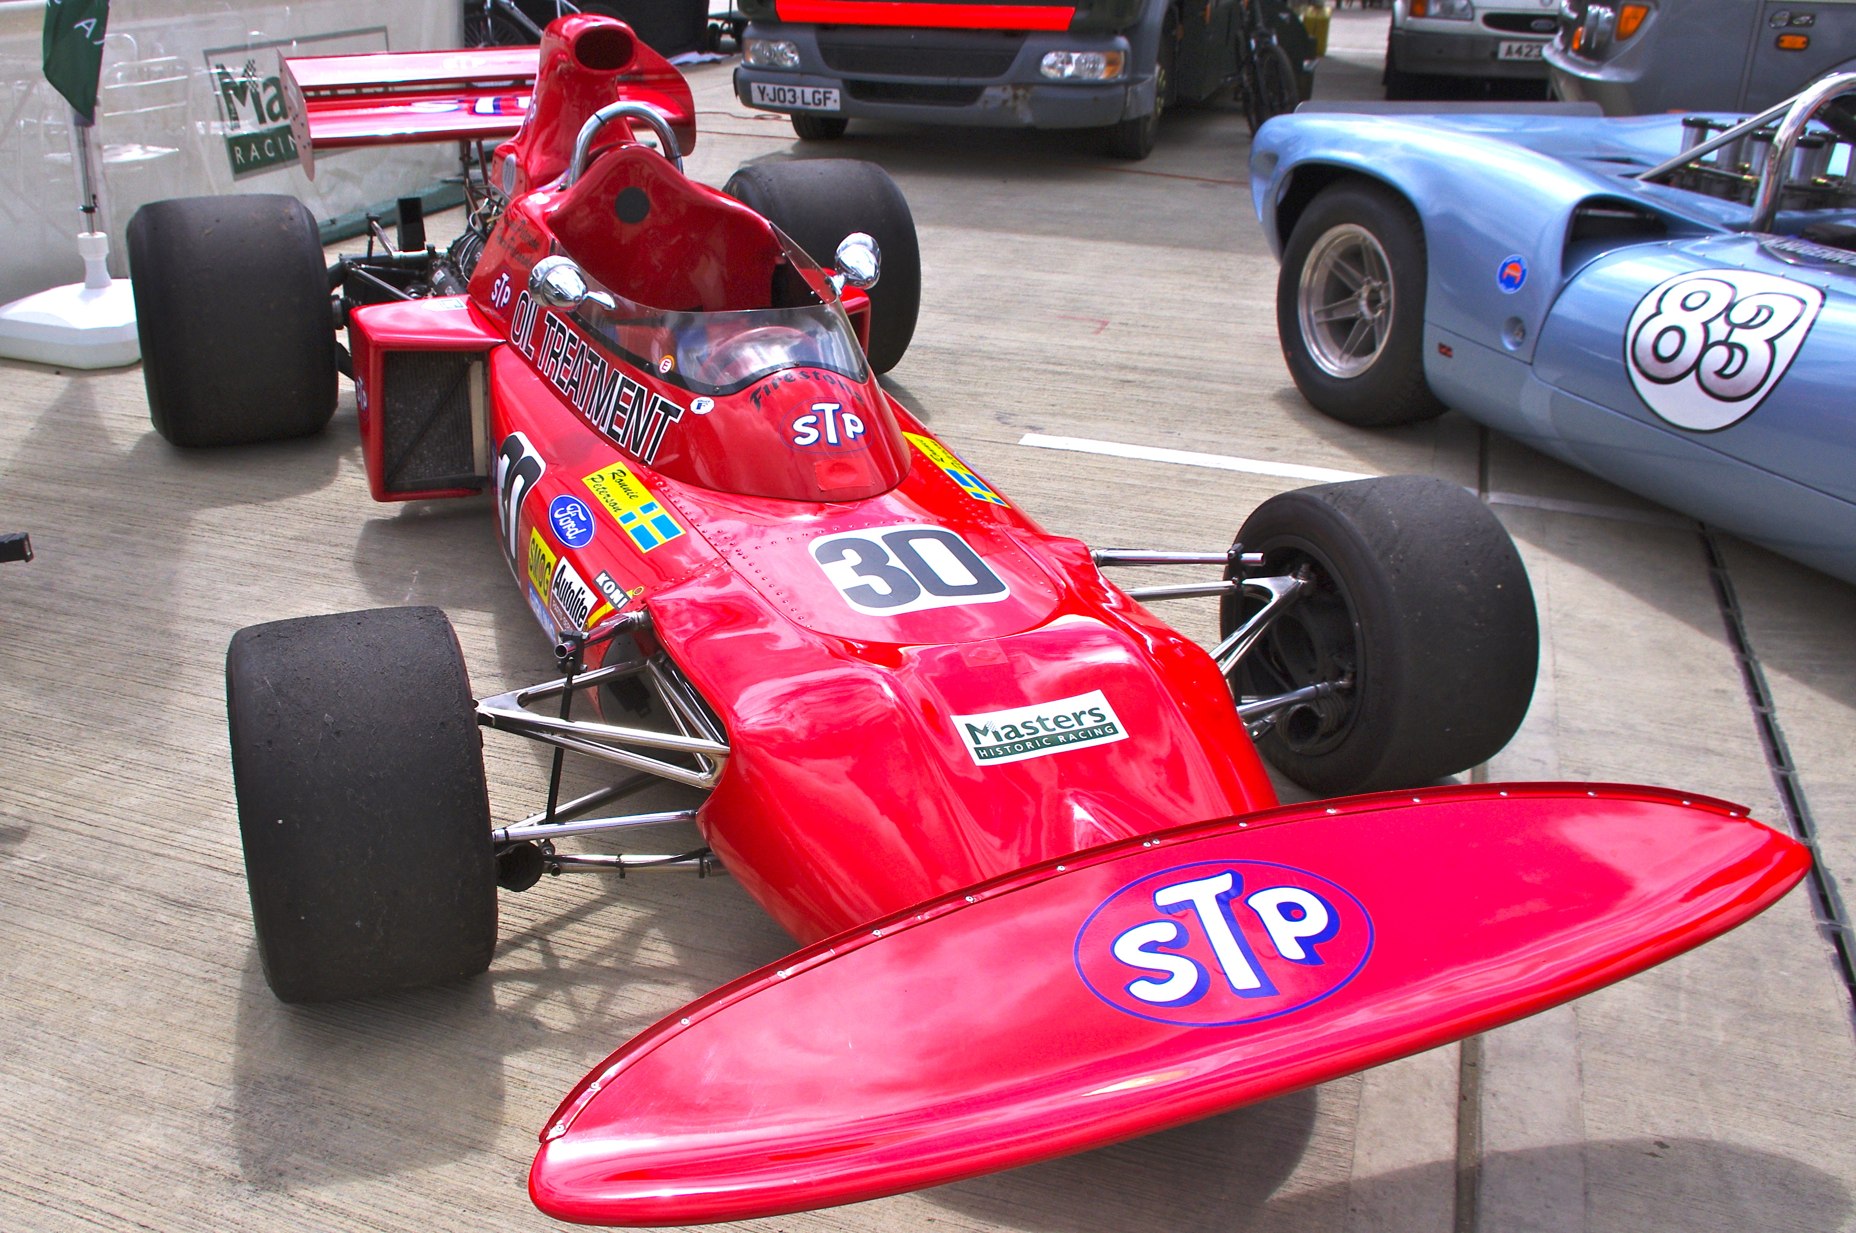 Ronnie Peterson's 1971 March 711 | Flickr - Photo Sharing!